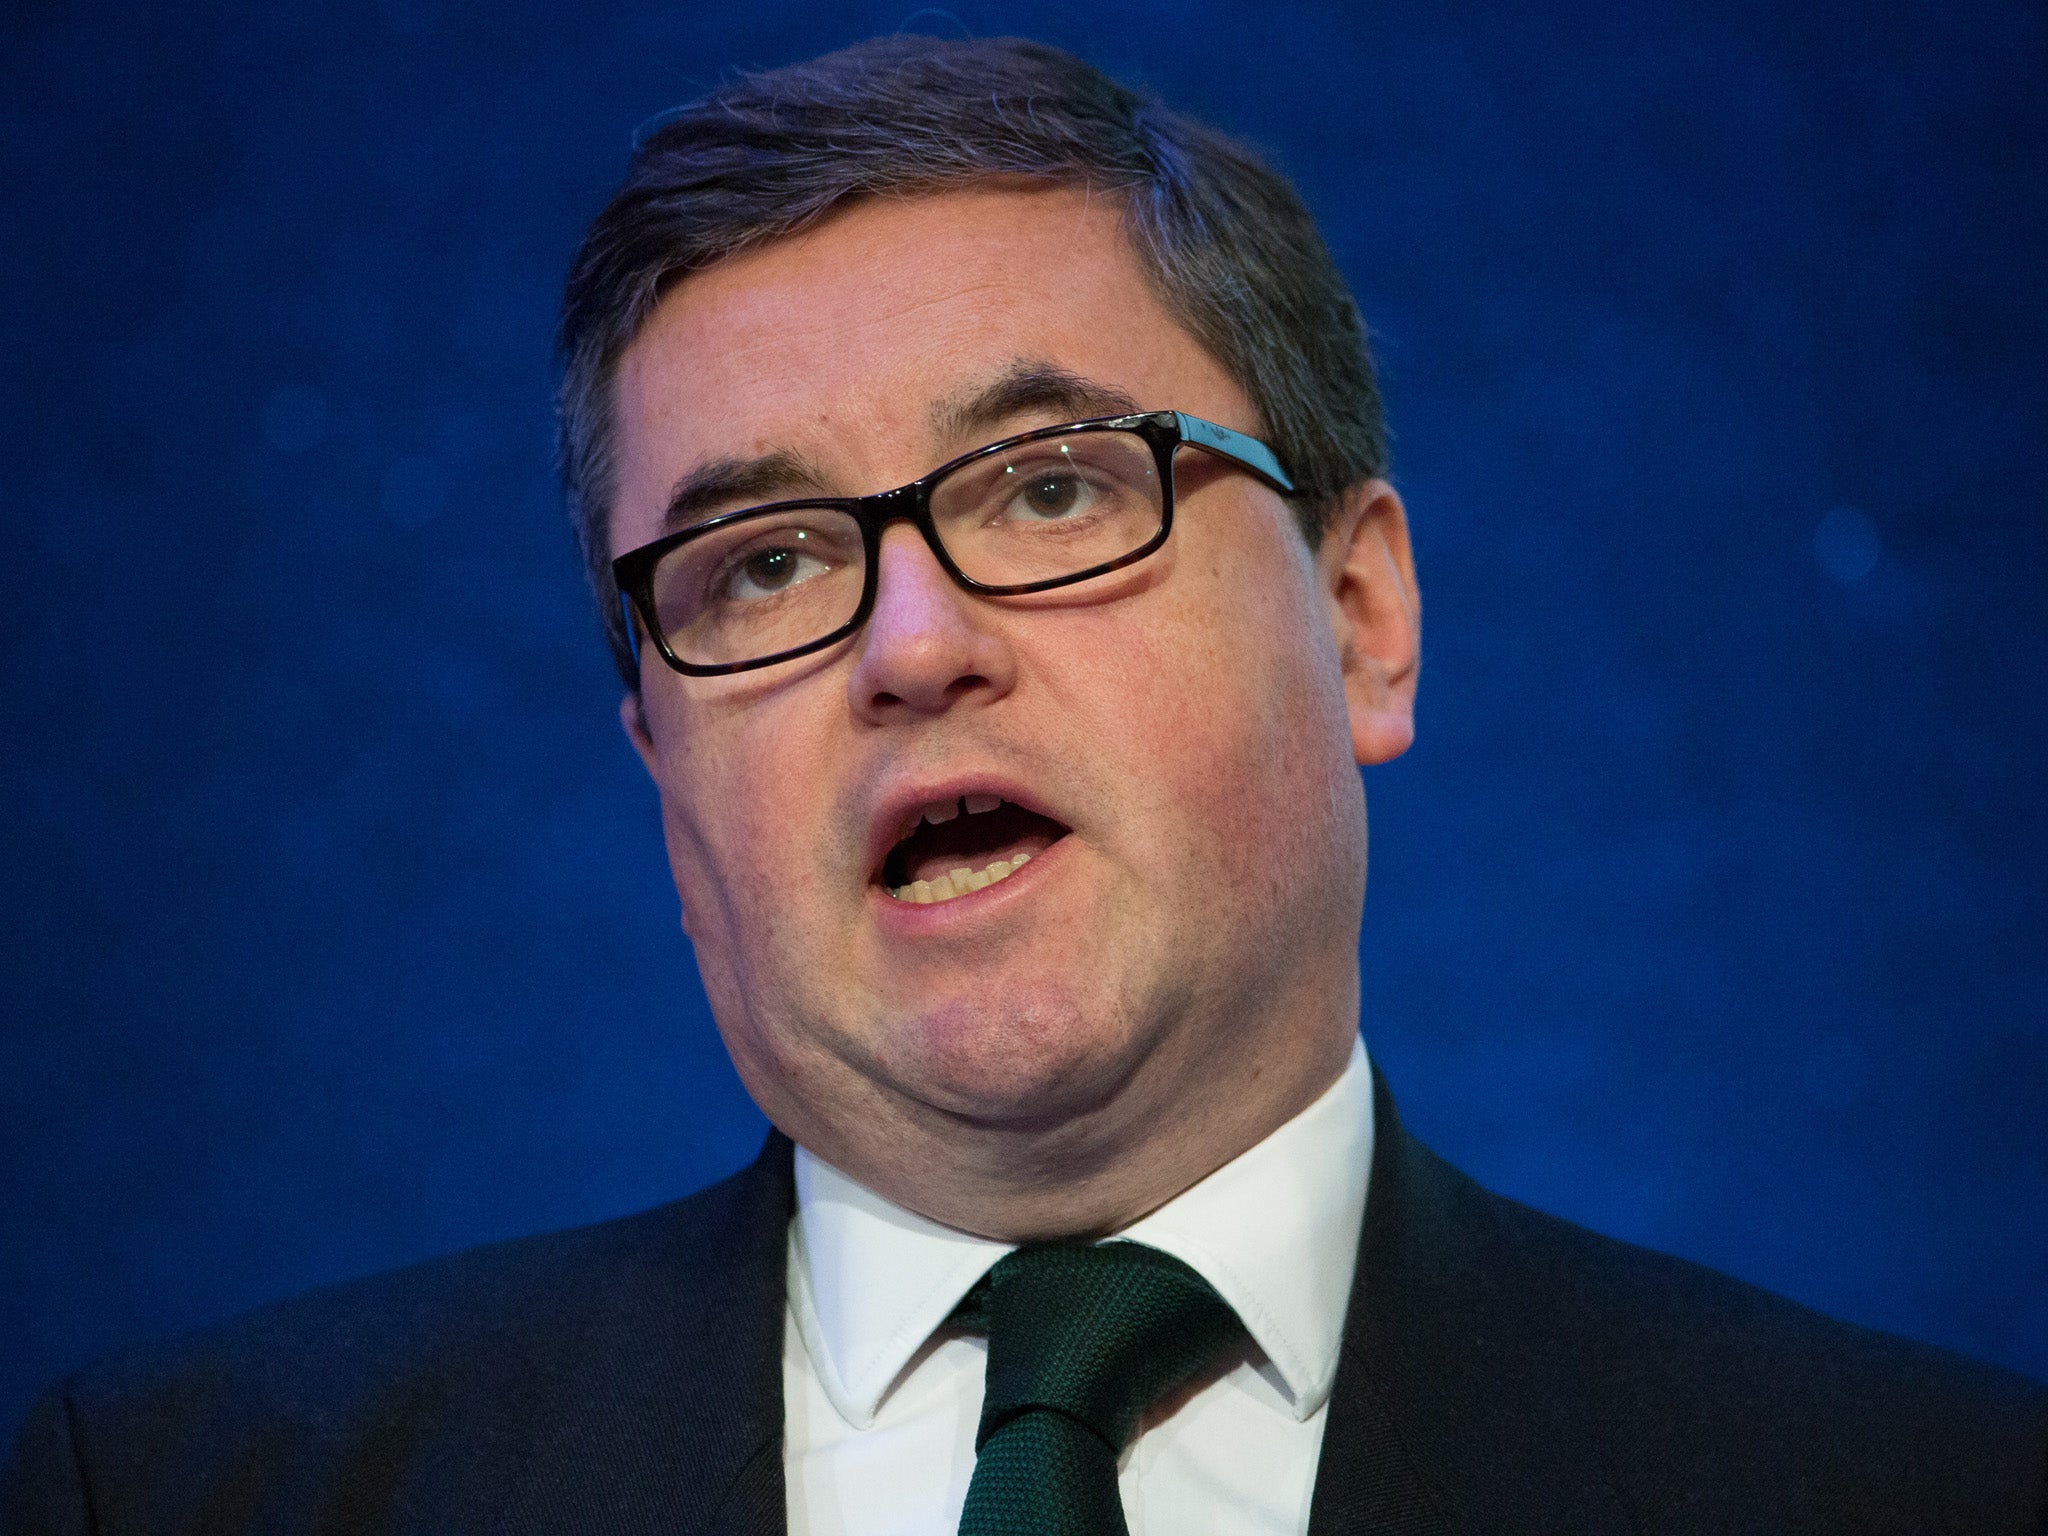 Solicitor General Robert Buckland said there is a ‘strong case’ for the legislation, which would make prosecuting big corporations easier